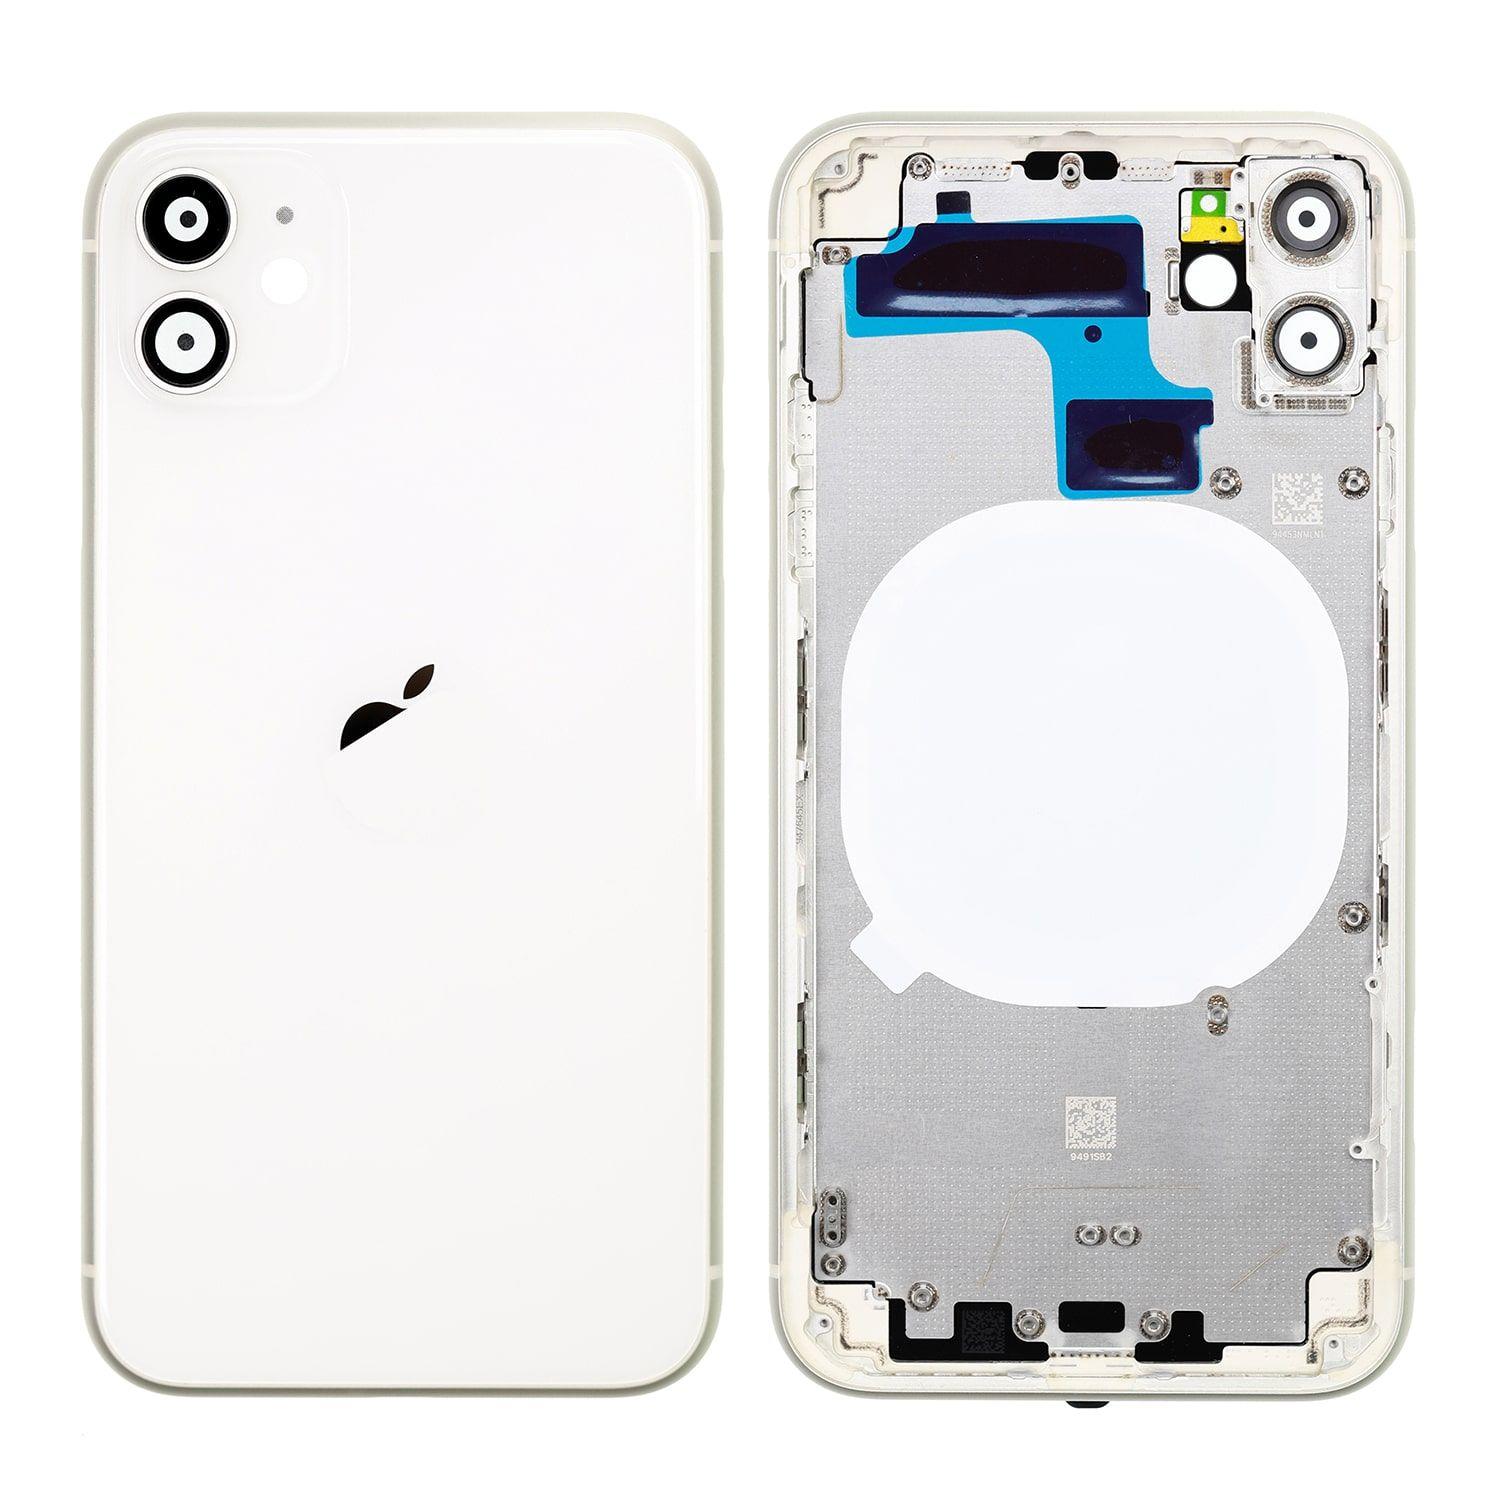 Body for iPhone 11 + back cover white